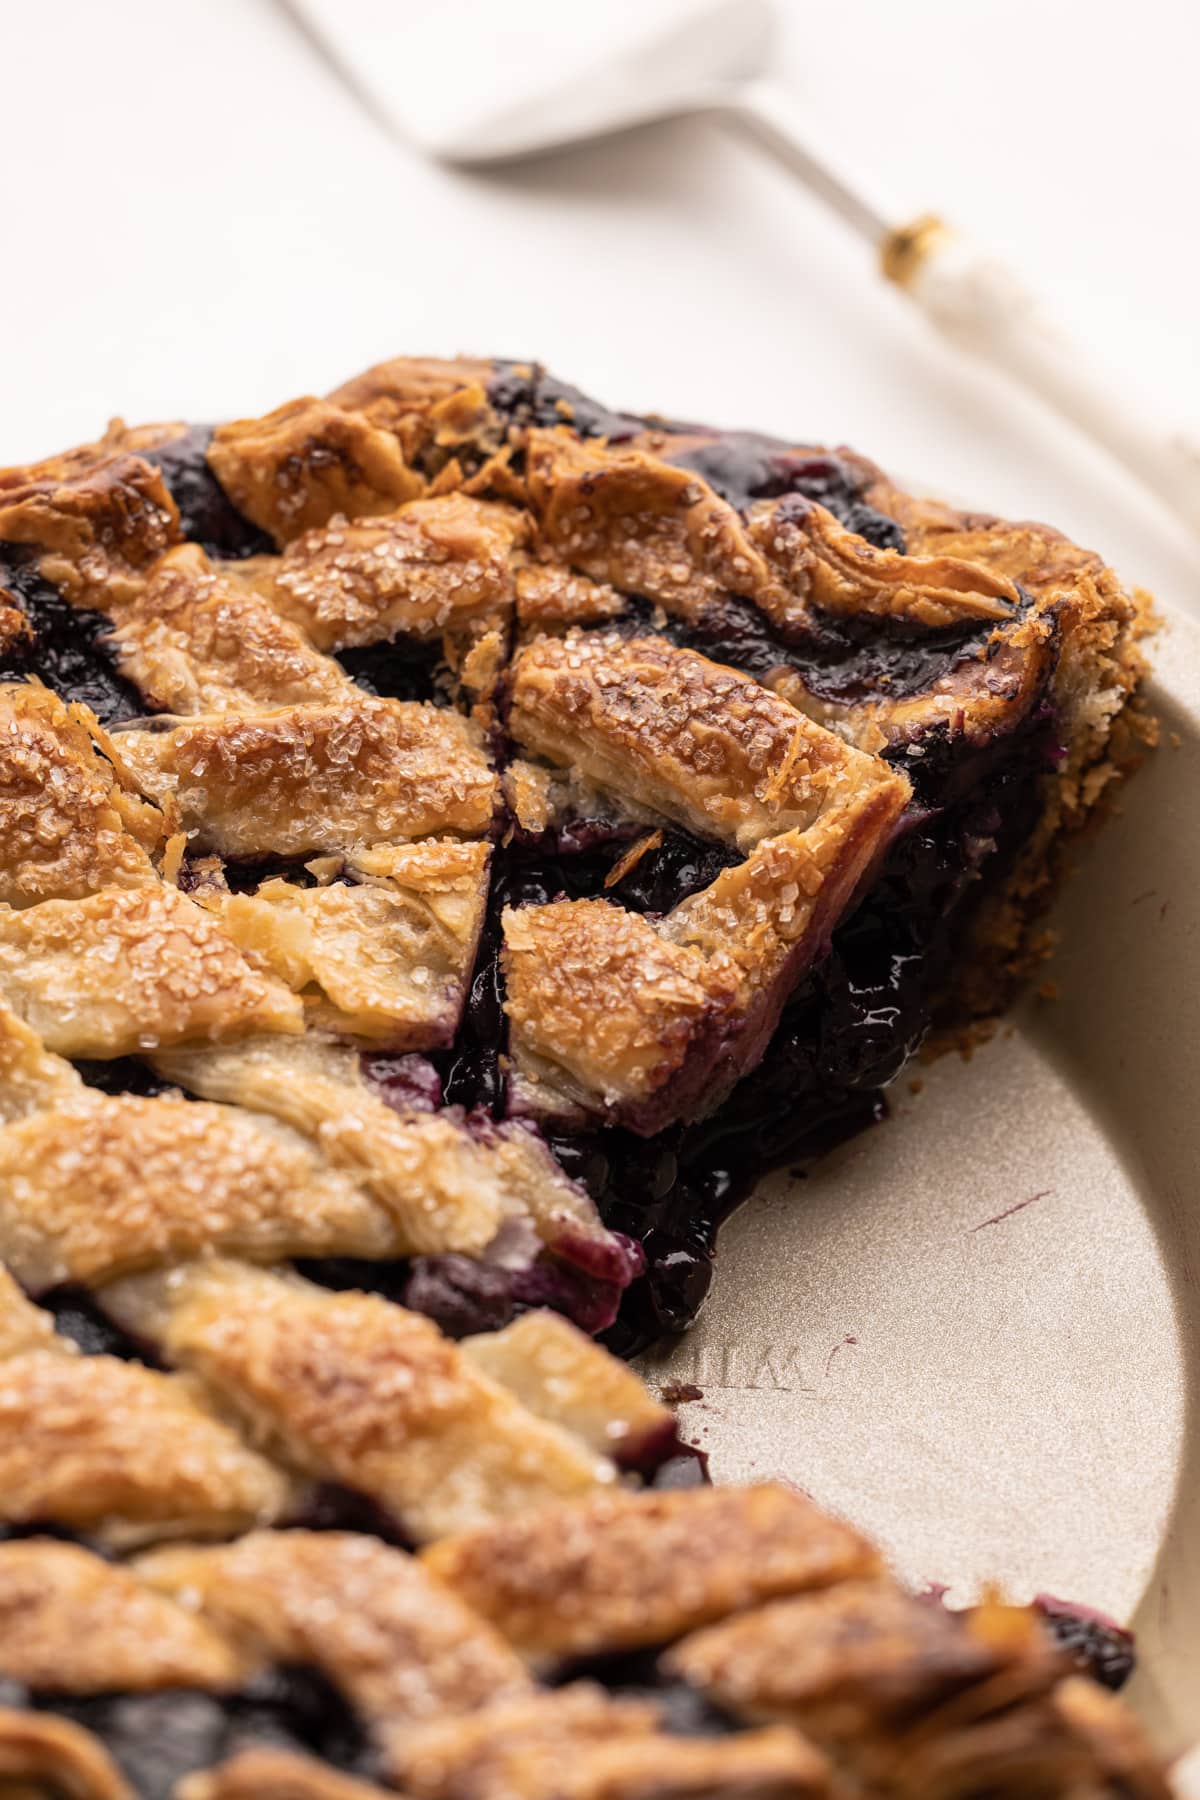 Classic blueberry pie with a slice removed.